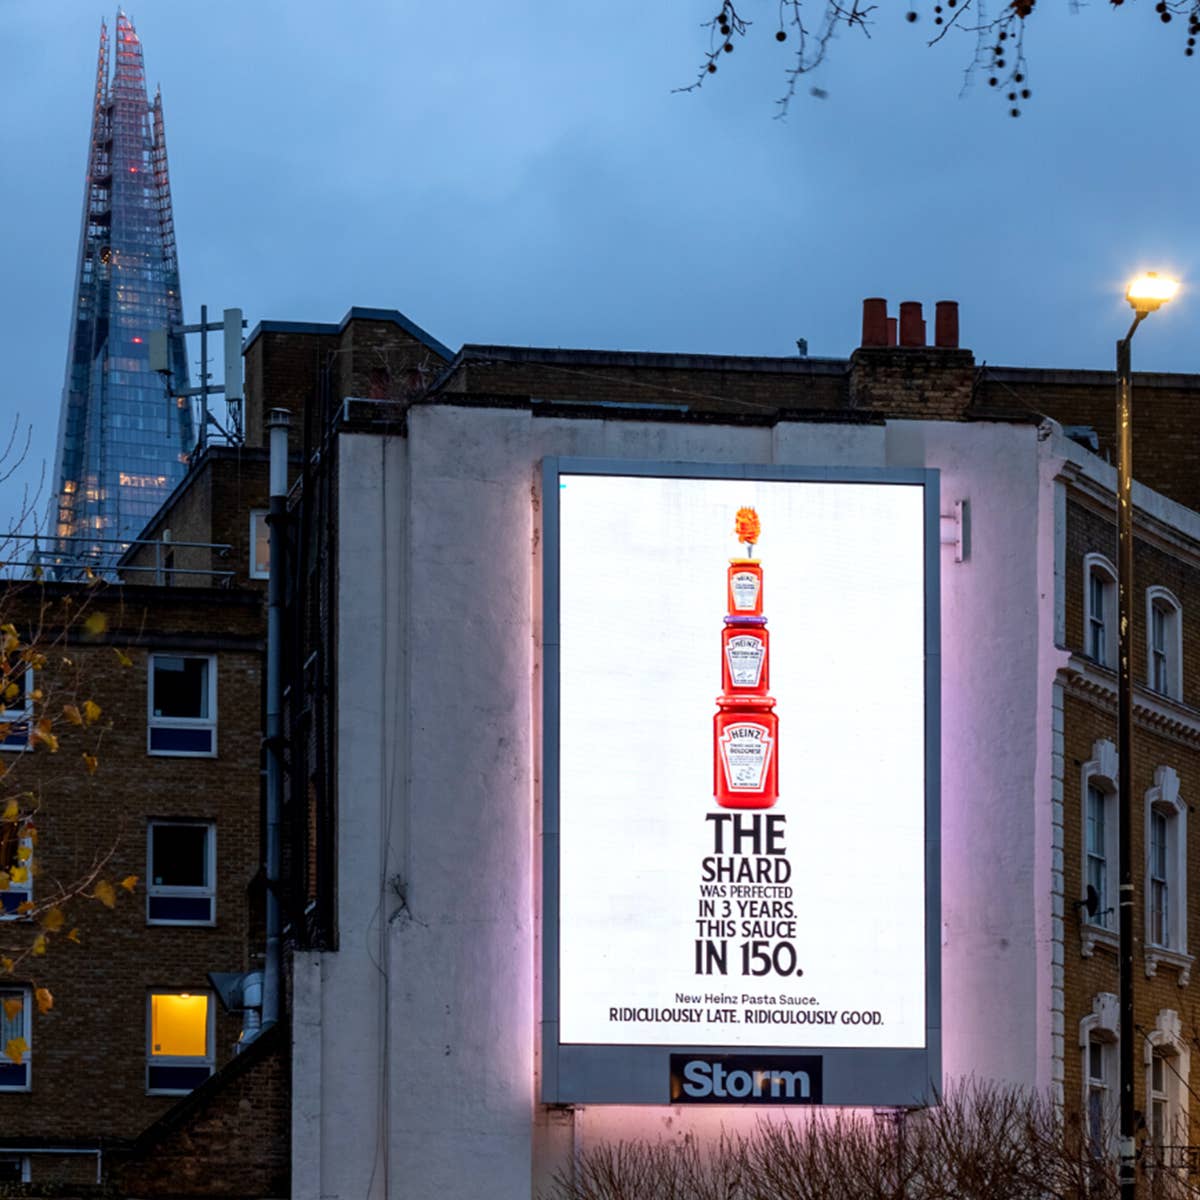 Heinz wishes the Shard a happy 10th birthday in pasta sauce push